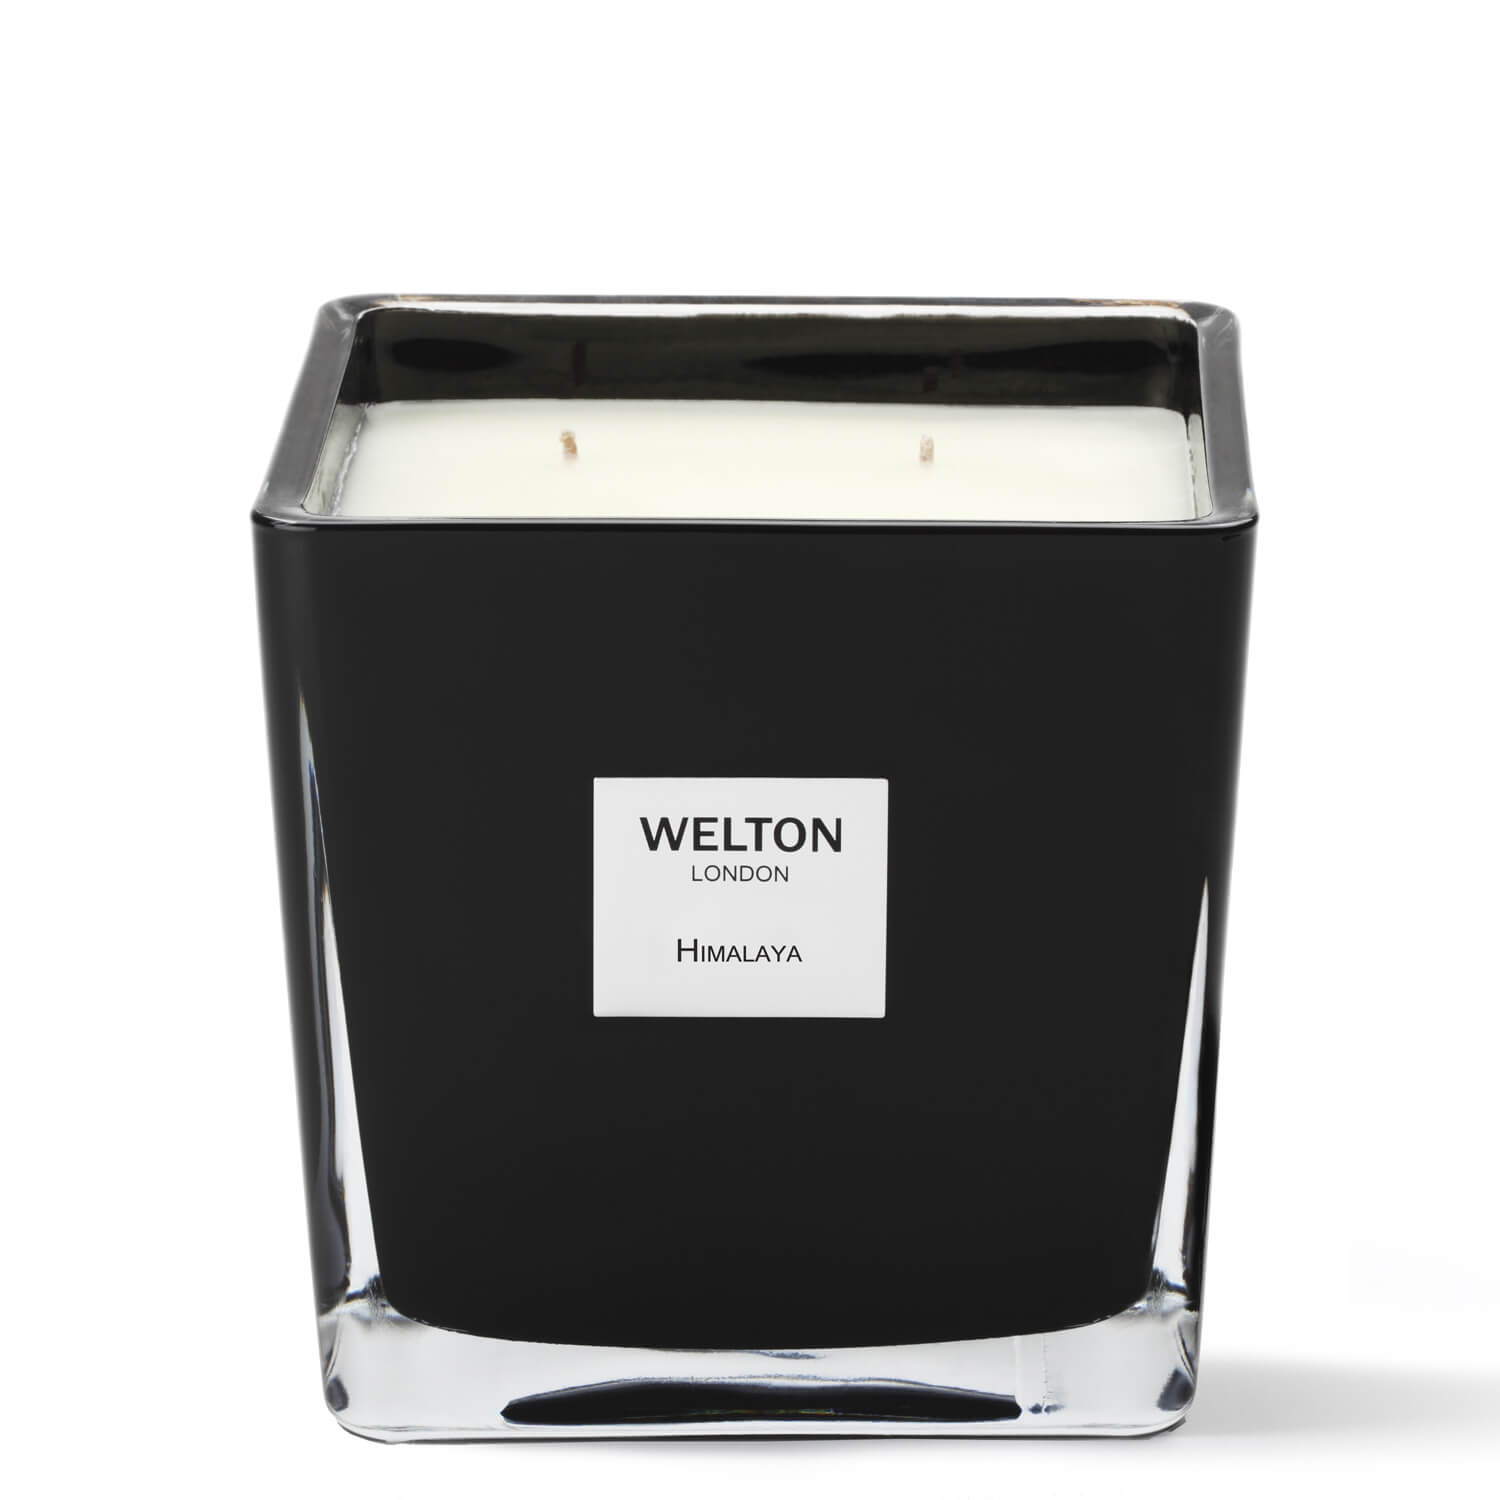 welton london candle himalaya large
citrus - floral - powdery scented candles 